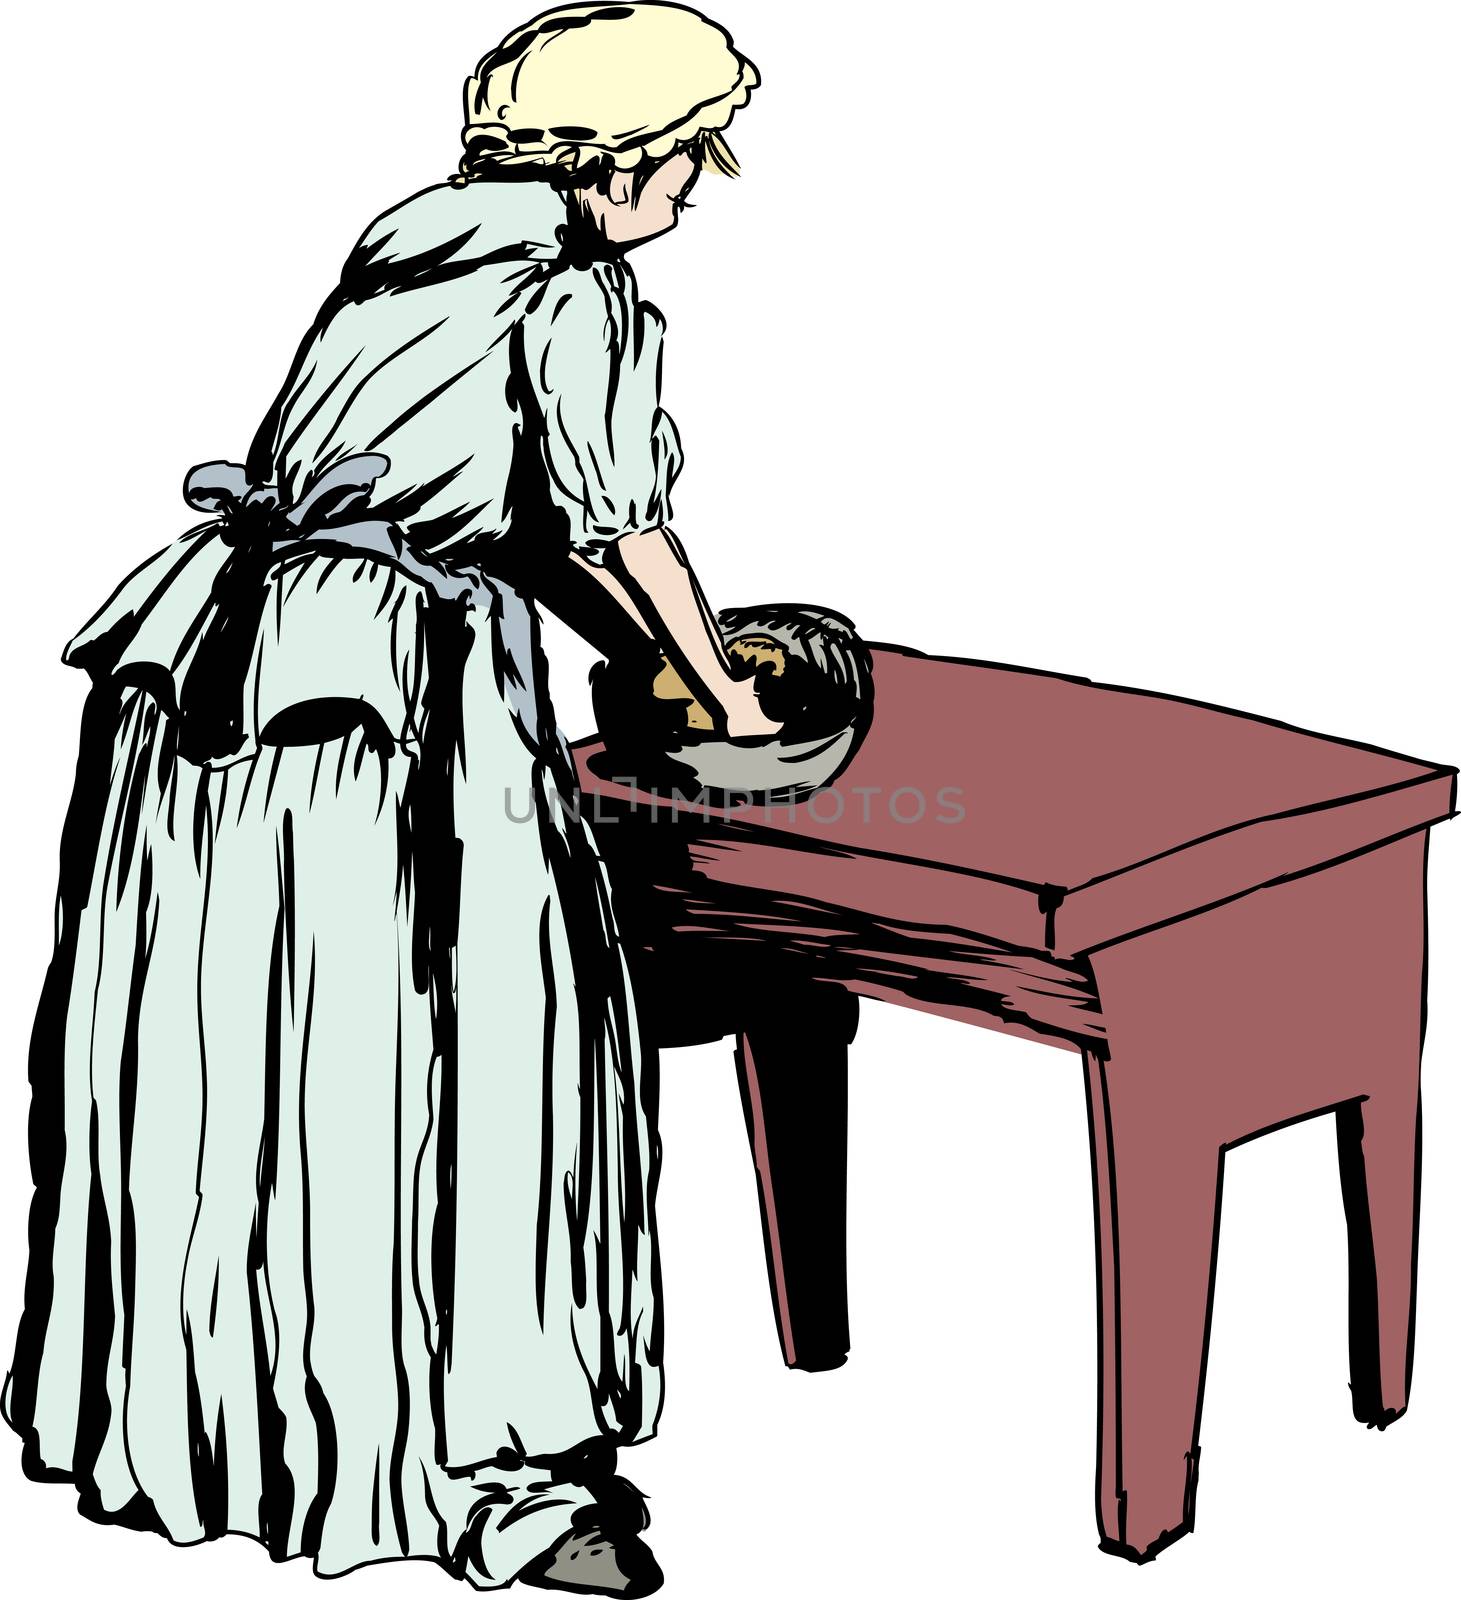 Illustration of single Caucasian woman in 18th century clothing kneading dough on table